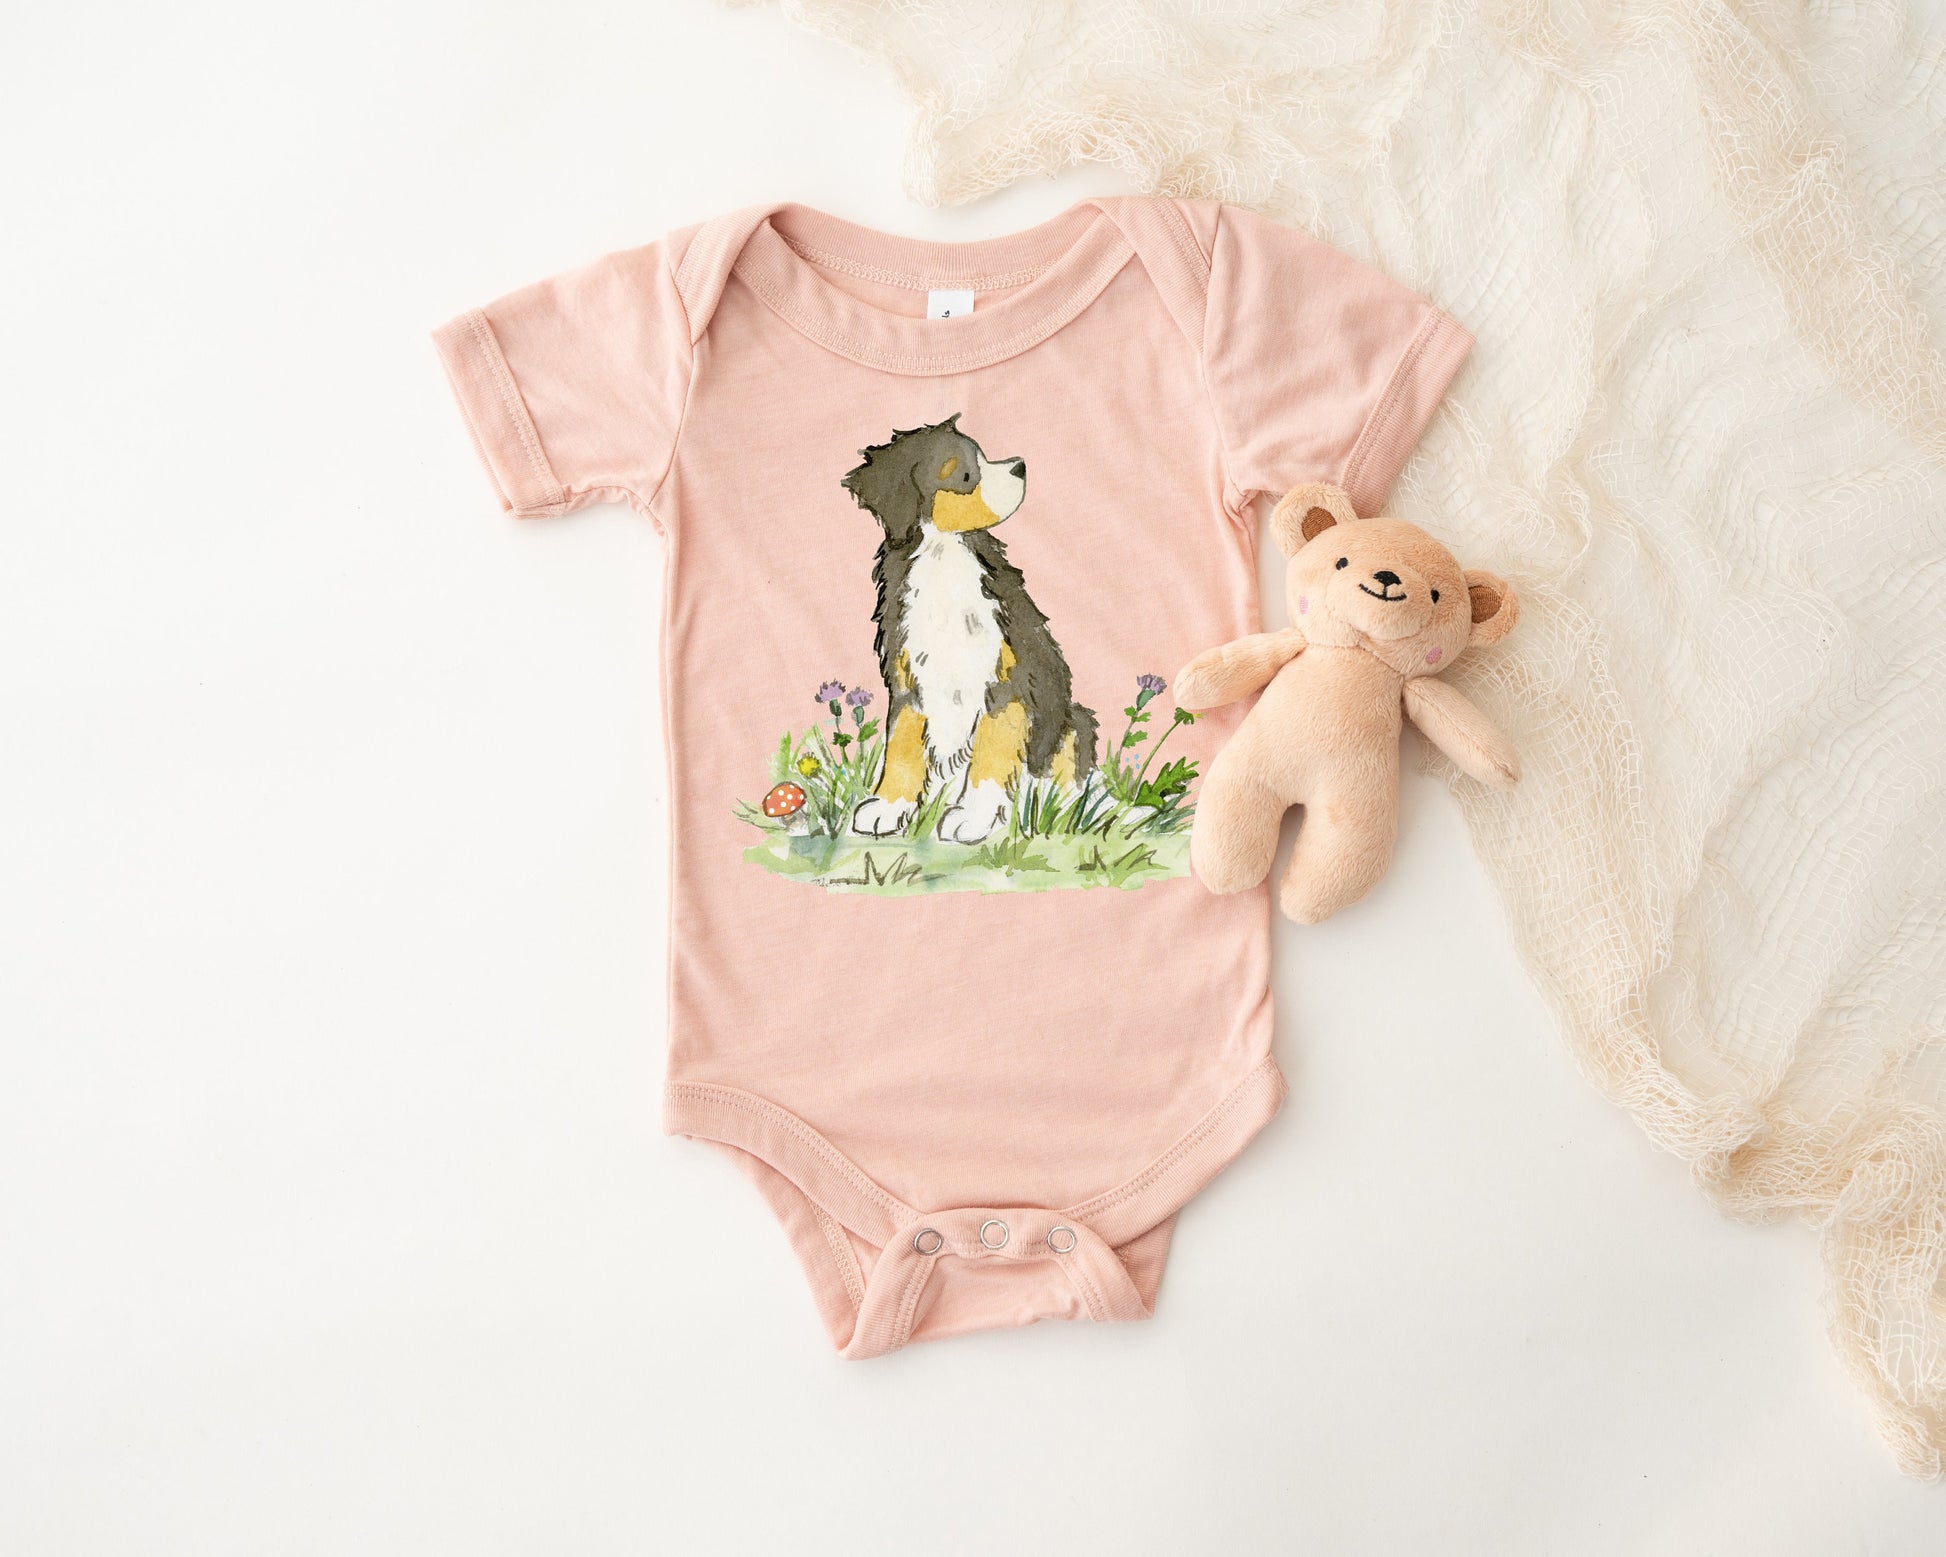 Peach colored infant bodysuit with artwork of a cute Bernese Mountain Dog on it.